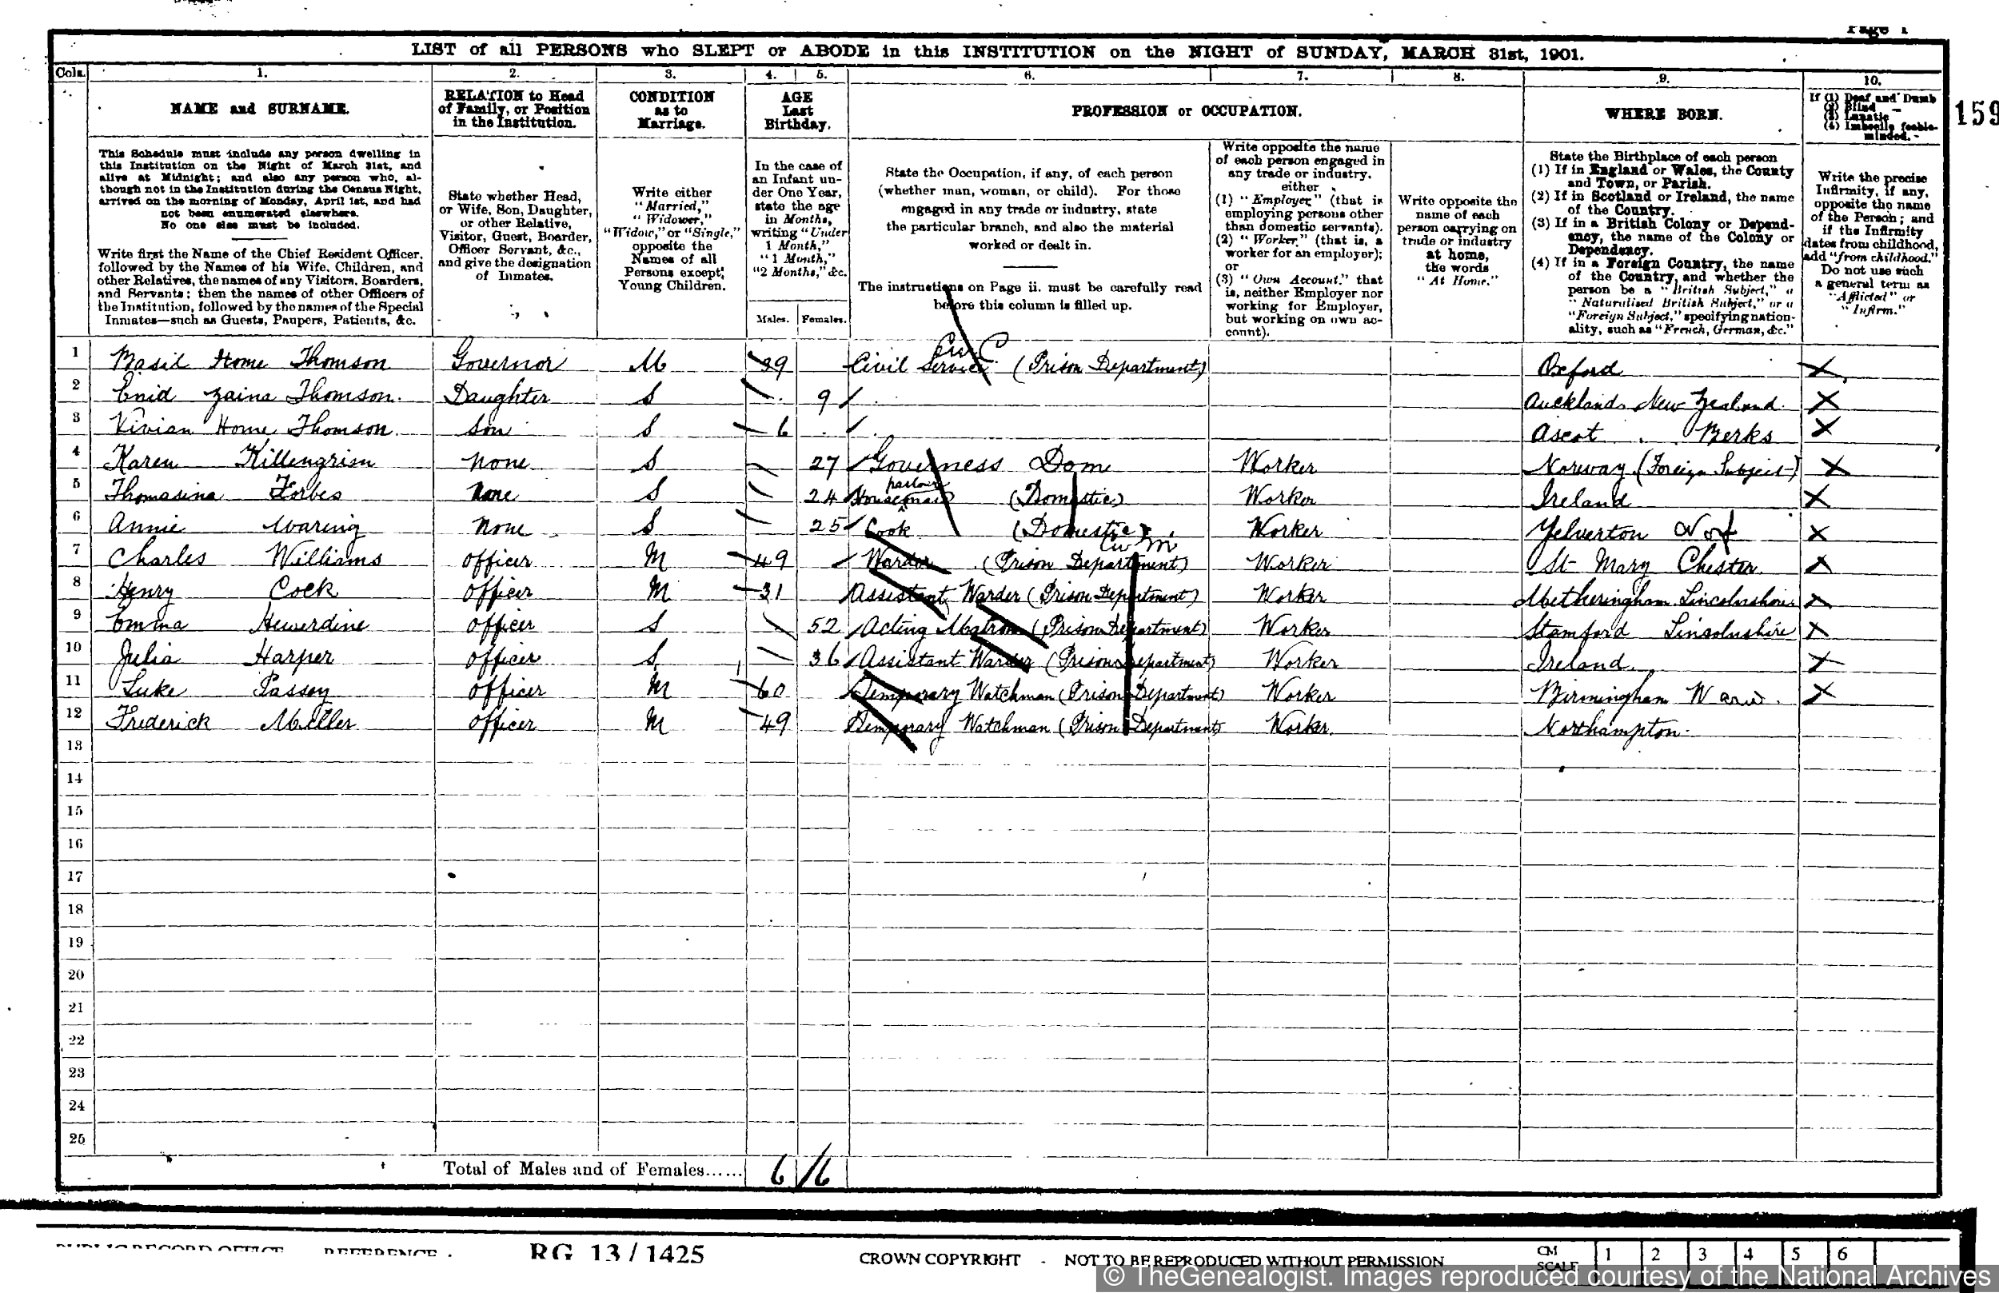 Basil Thomson in the 1901 census